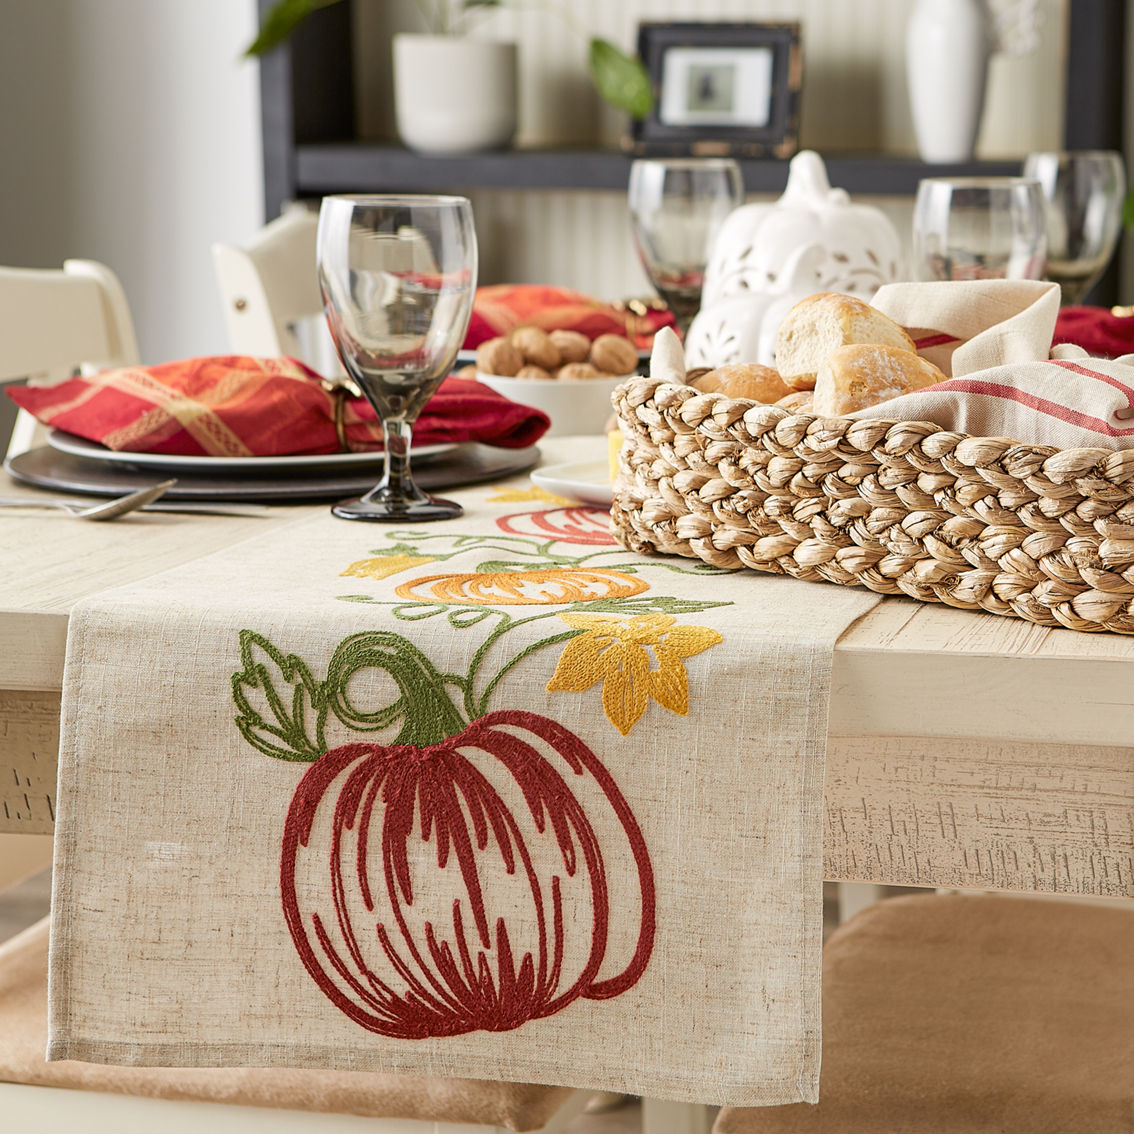 Design Imports 14 x 70 in. Pumpkin Vine Embroidered Table Runner - Image 7 of 8